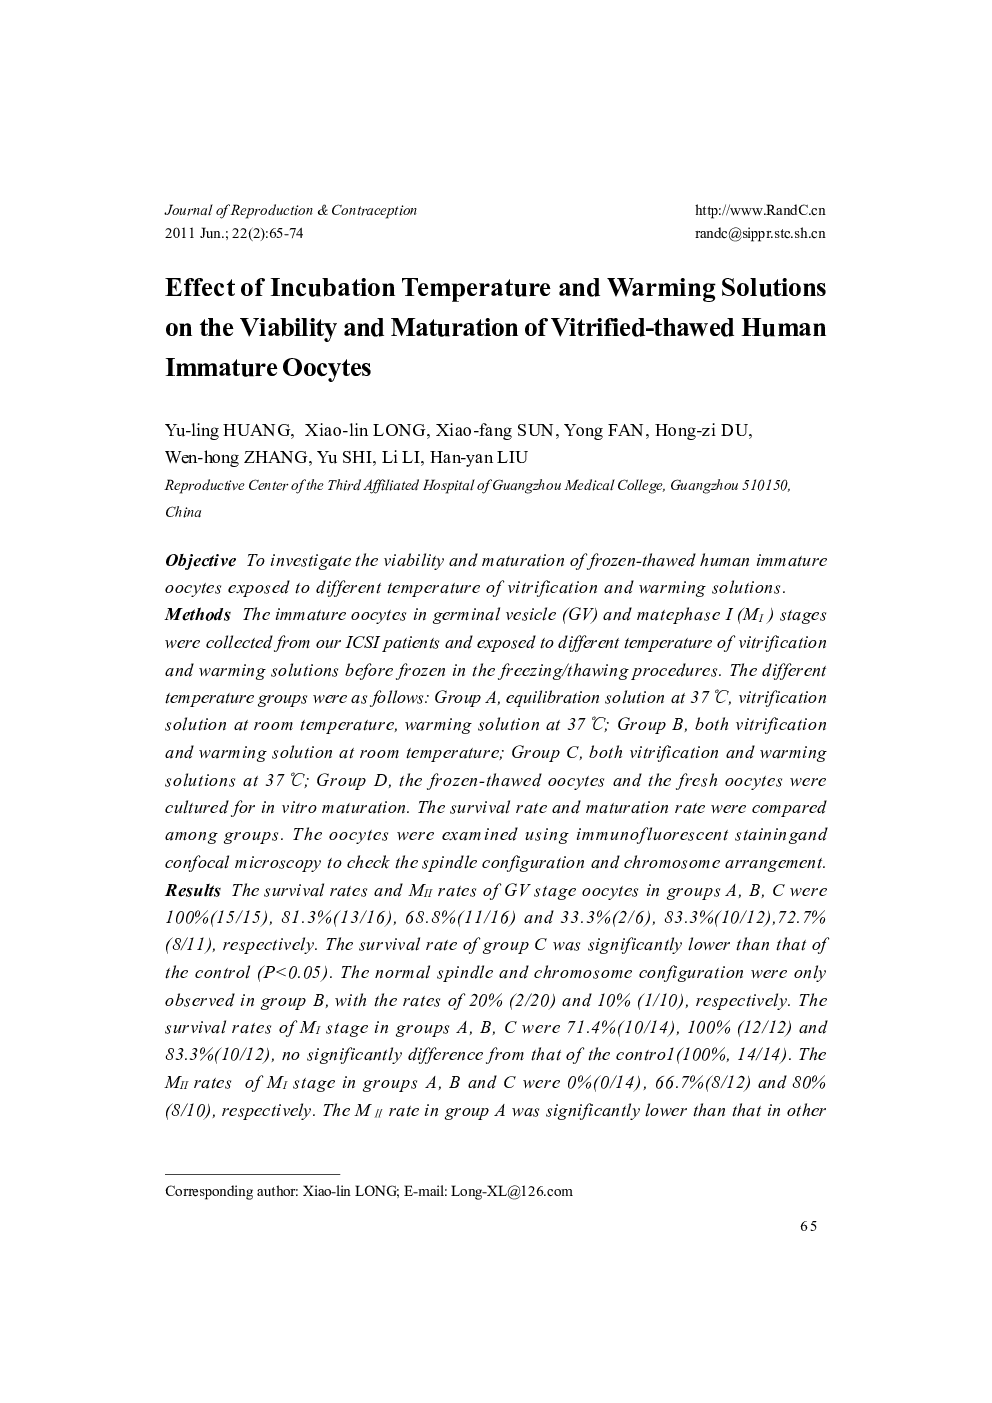 Effect of Incubation Temperature and Warming Solutions on the Viability and Maturation of Vitrified-thawed Human Immature Oocytes